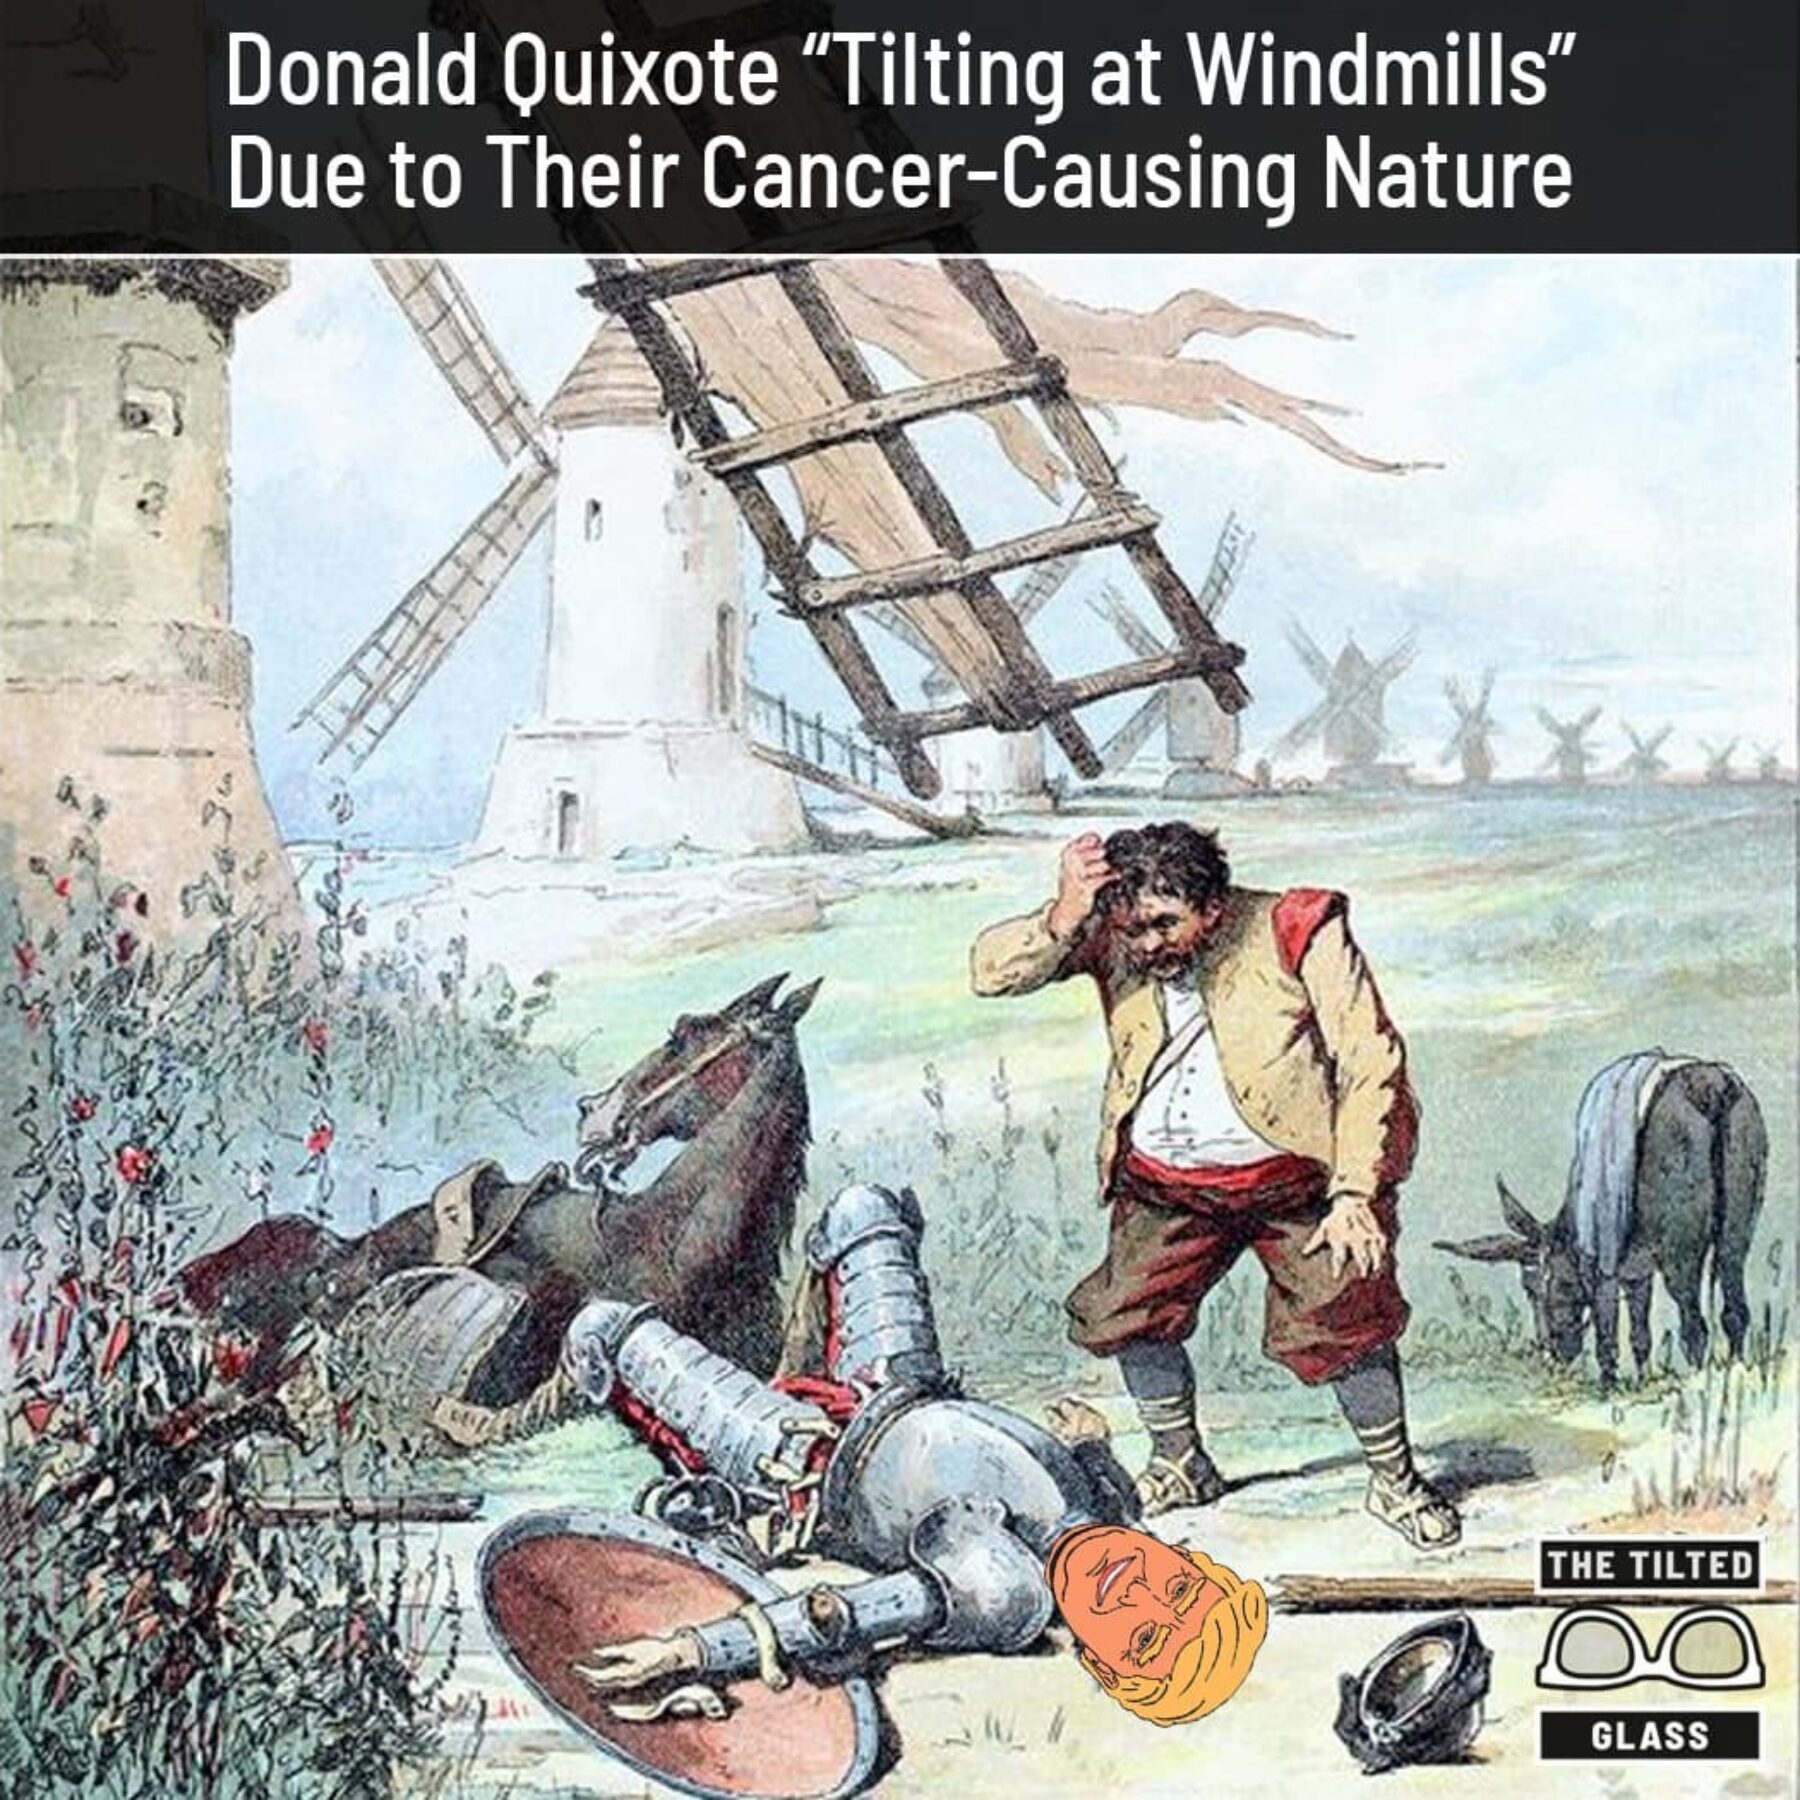 Donald Quixote “Tilting at Windmills” Due to Their Cancer-Causing Nature